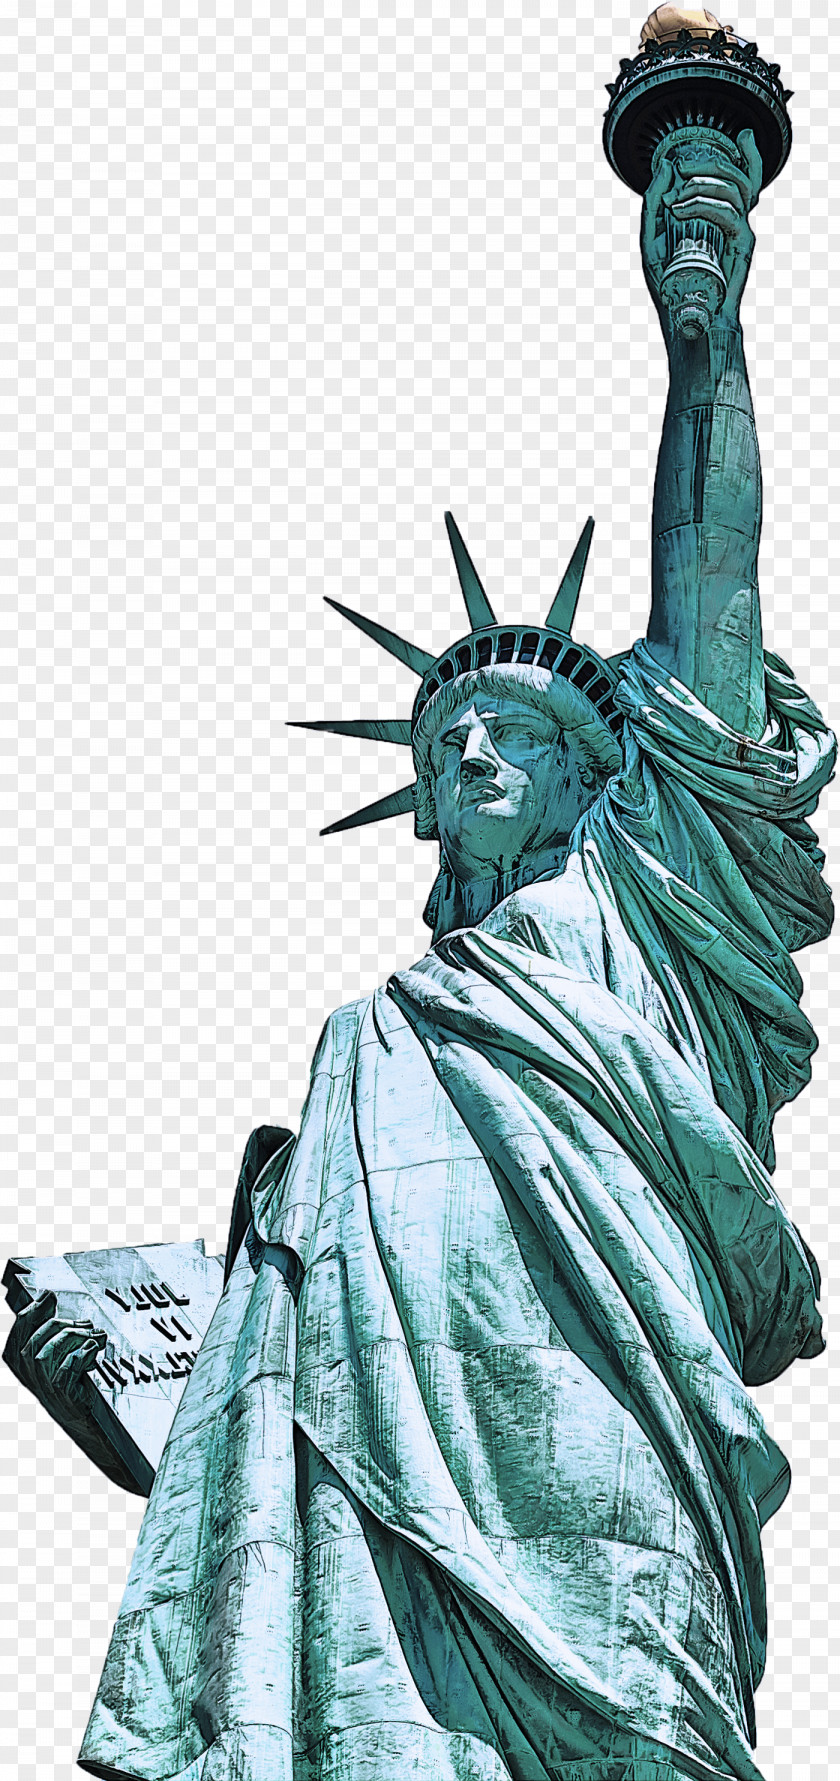 Statue Sculpture Classical Stone Carving Of Liberty National Monument PNG